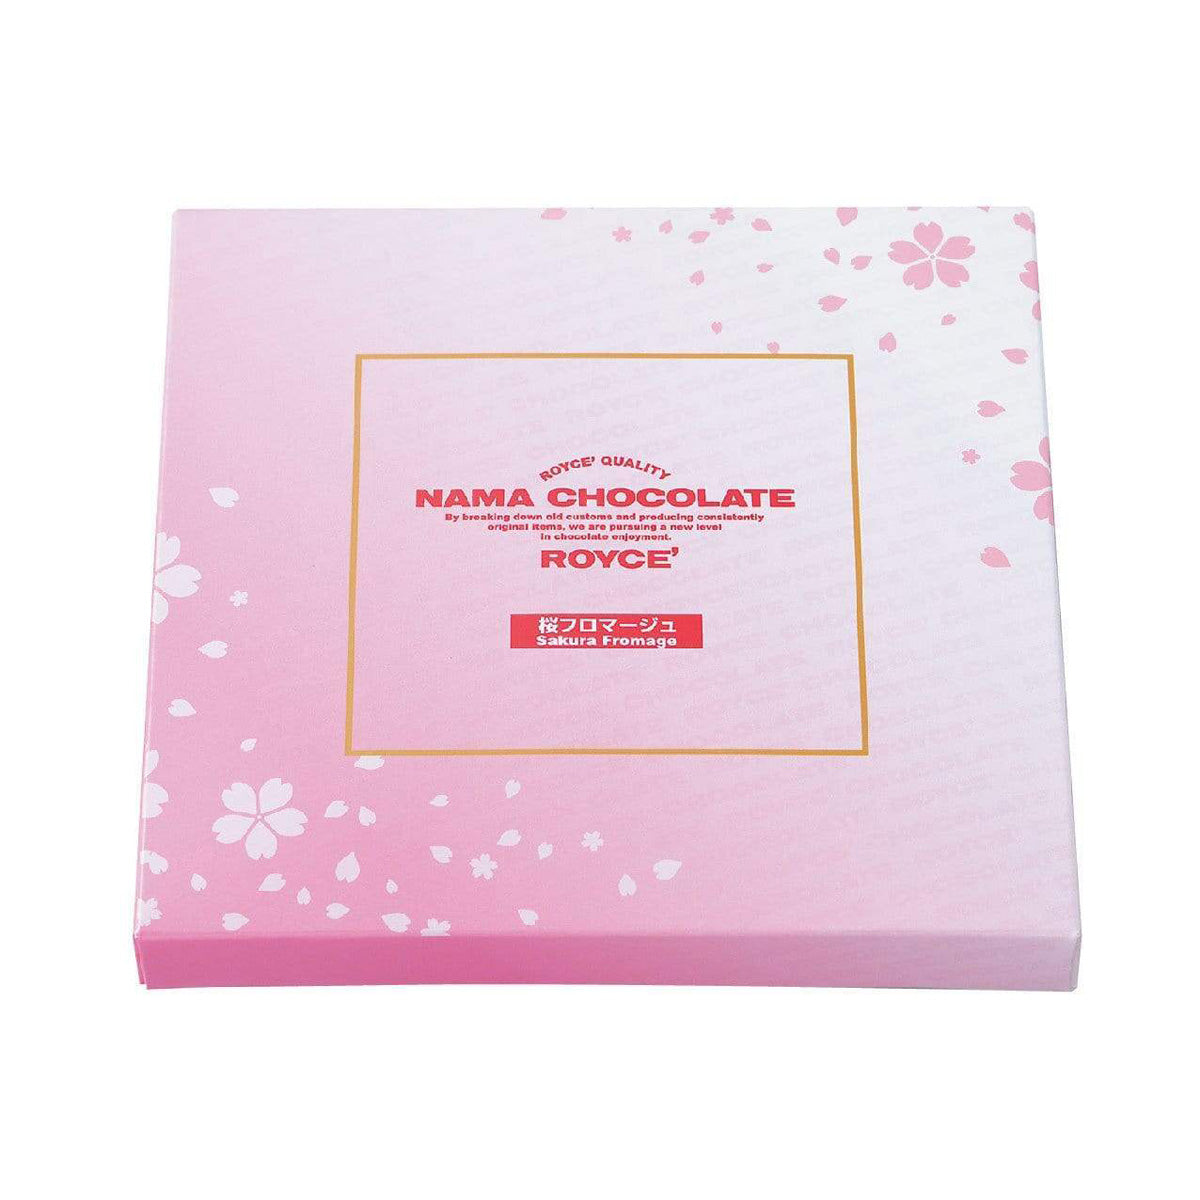 ROYCE' Chocolate - Nama Chocolate "Sakura Fromage" - Image shows a pink box with floral prints. Pink text inside golden square says ROYCE' Quality Nama Chocolate By breaking down old customs and producing consistently original items, we are pursuing a new level in chocolate enjoyment. ROYCE' Sakura Fromage.